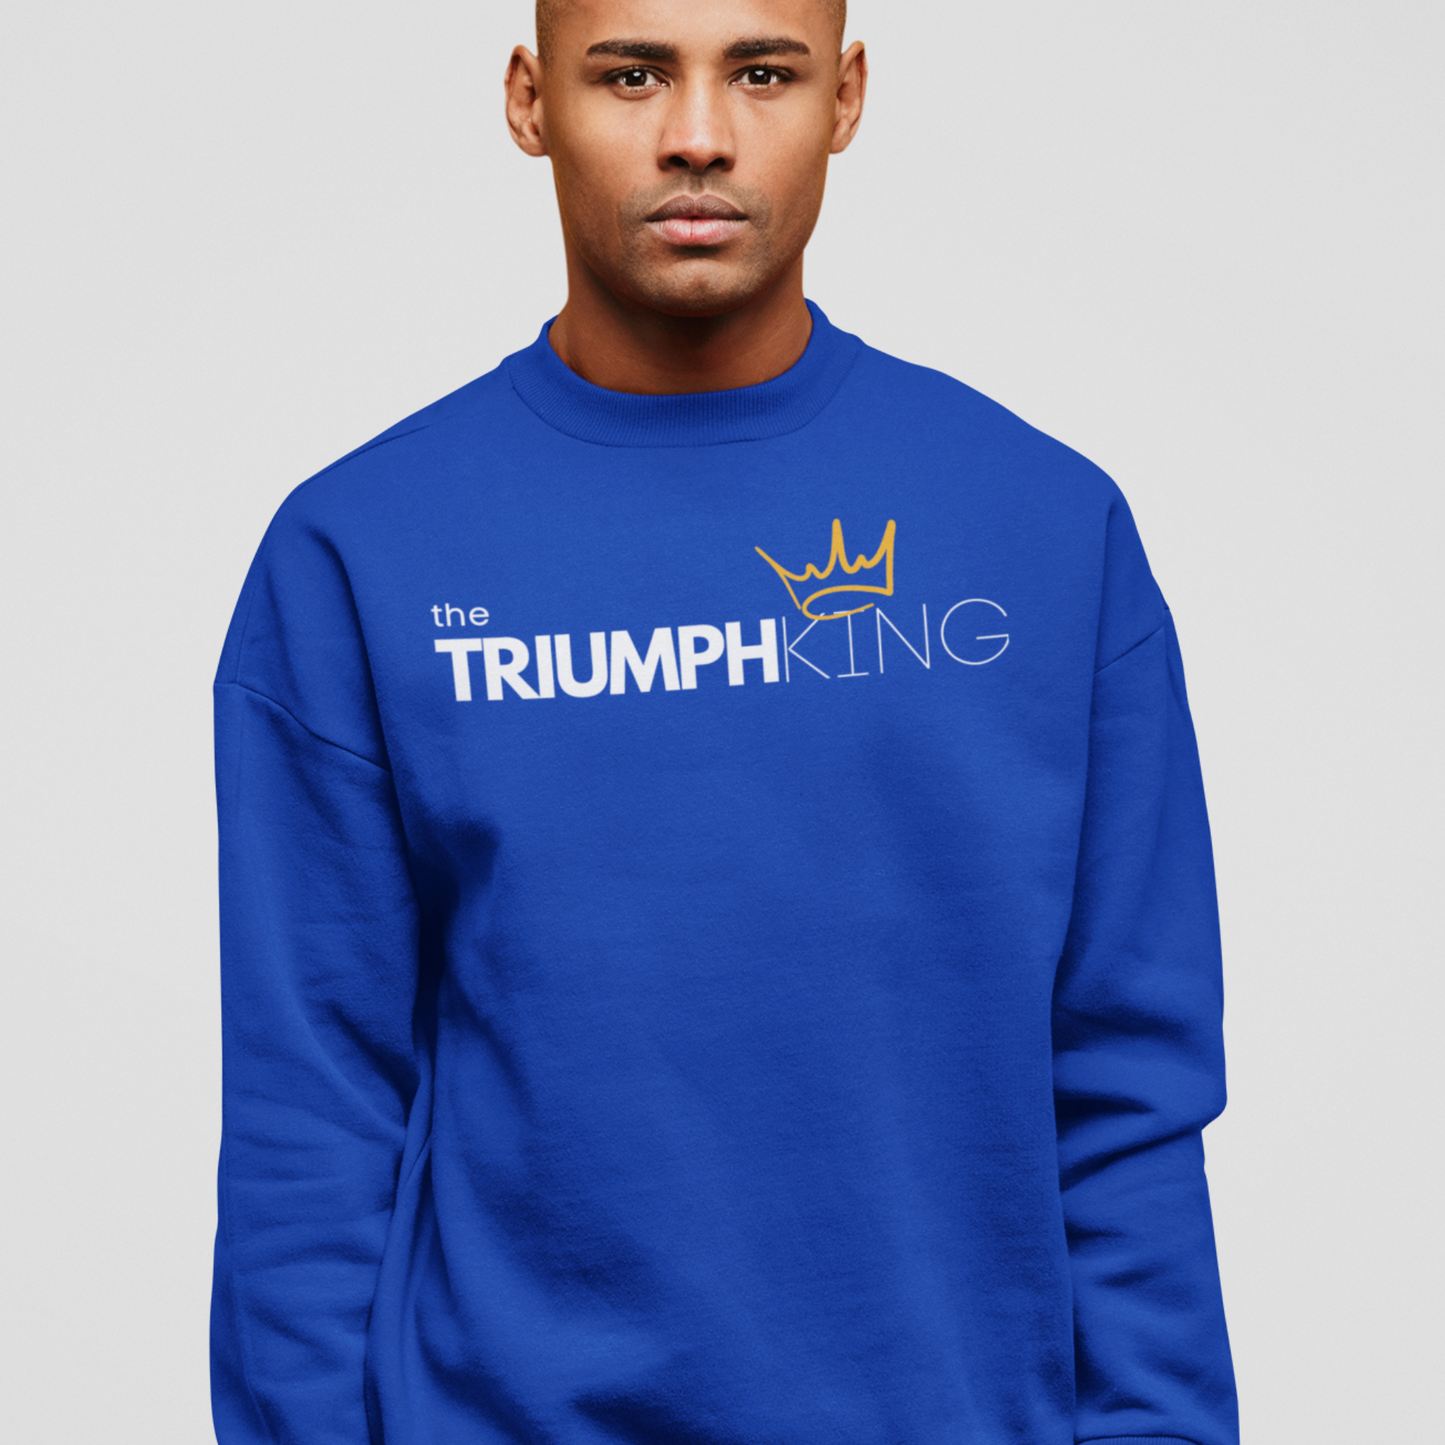 Buy our Triumph King royal blue sweatshirt. This comfortable faith based clothing is for Christian men who know they can triumph over any situation with the help of Jesus Christ. Enjoy this soft and comfy sweatshirt on a regular basis.